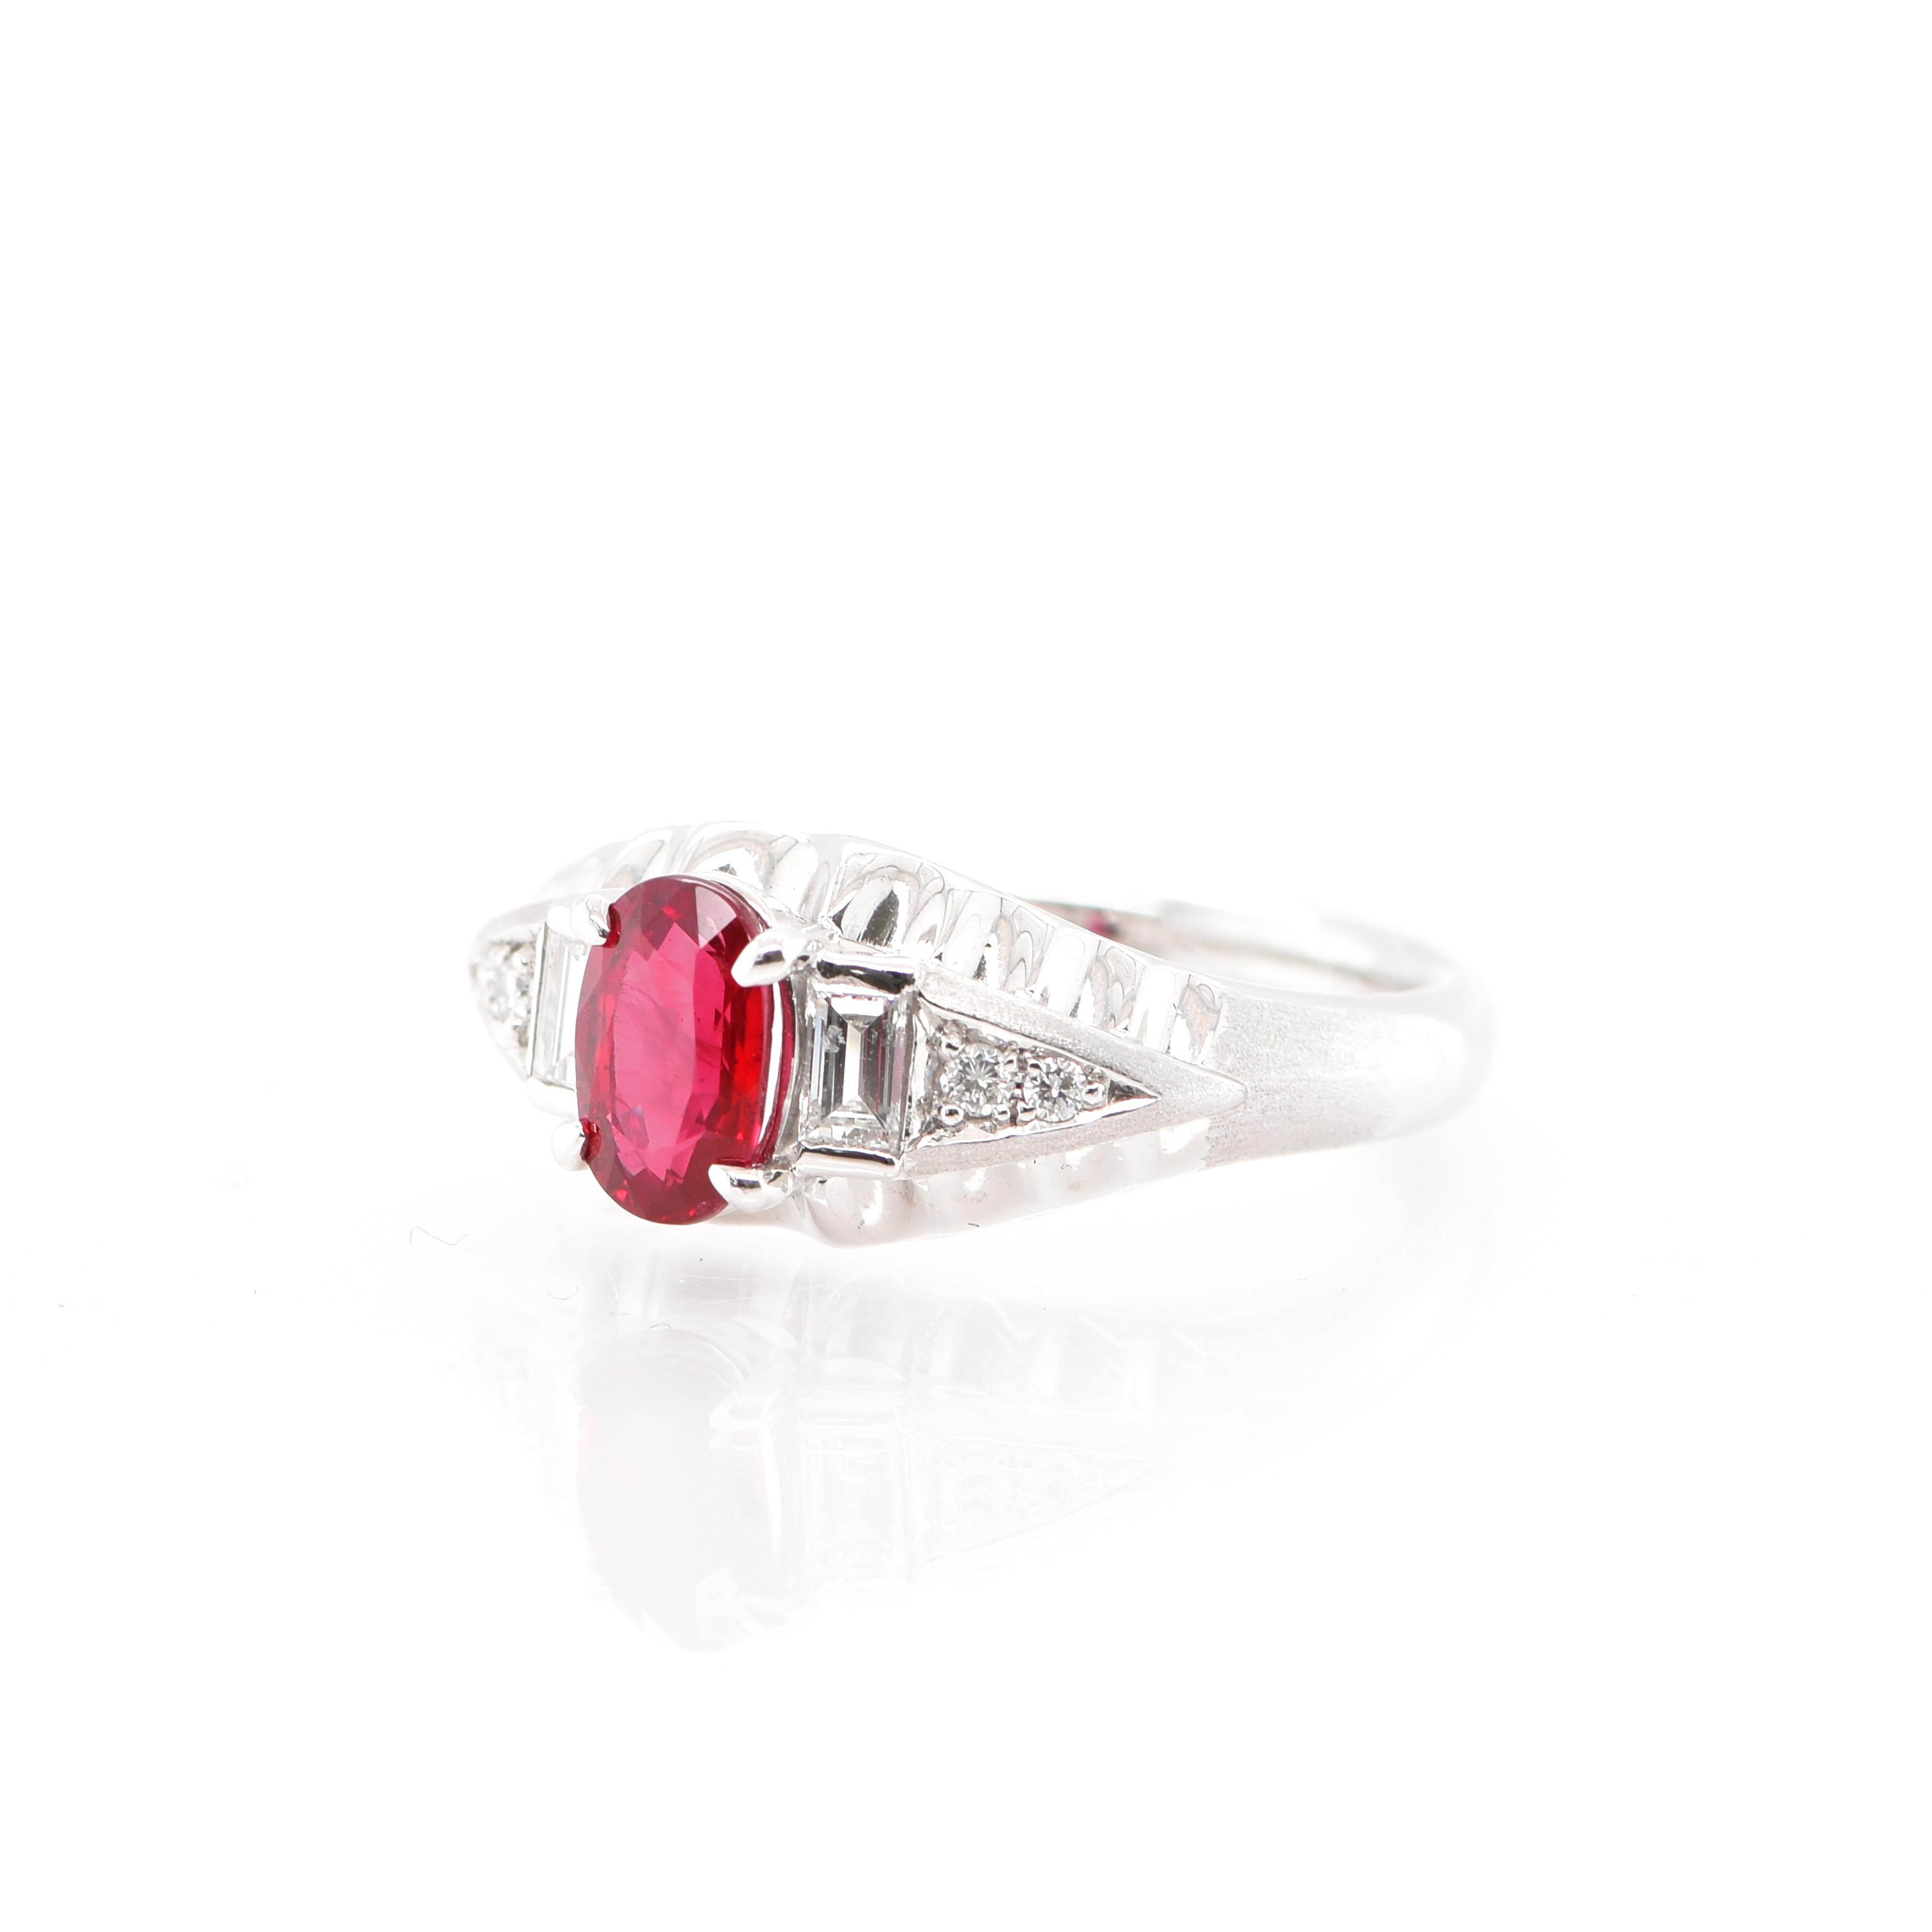 A beautiful ring featuring a GIA Certified 1.01 Carat Natural Untreated (No Heat) Ruby and 0.25 Carats of Diamond Accents set in Platinum. The Ruby exhibits beautiful even color and Luster. Rubies are referred to as 